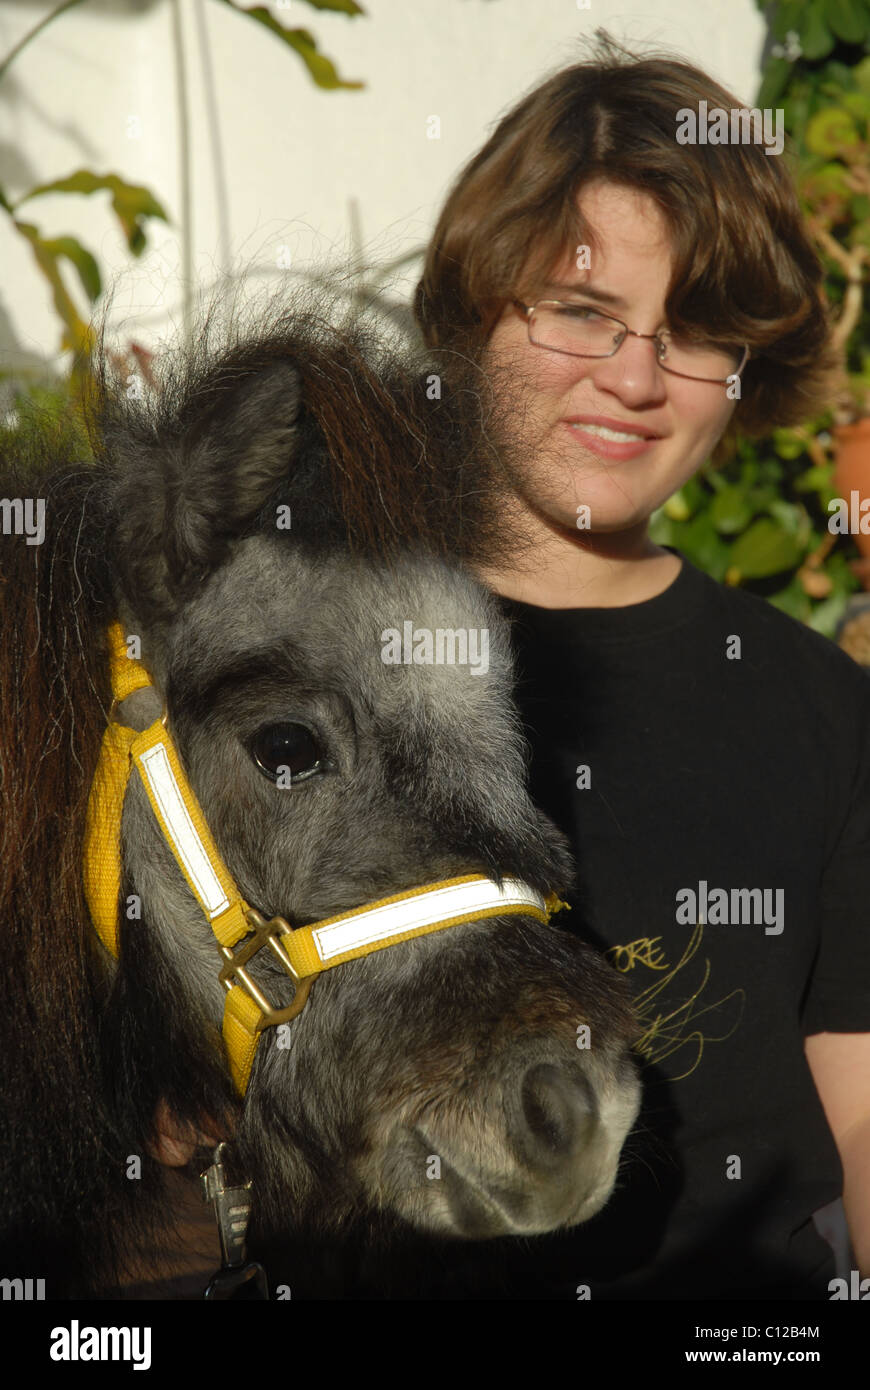 girl (aged 12) with pet Falabella miniature horse Stock Photo